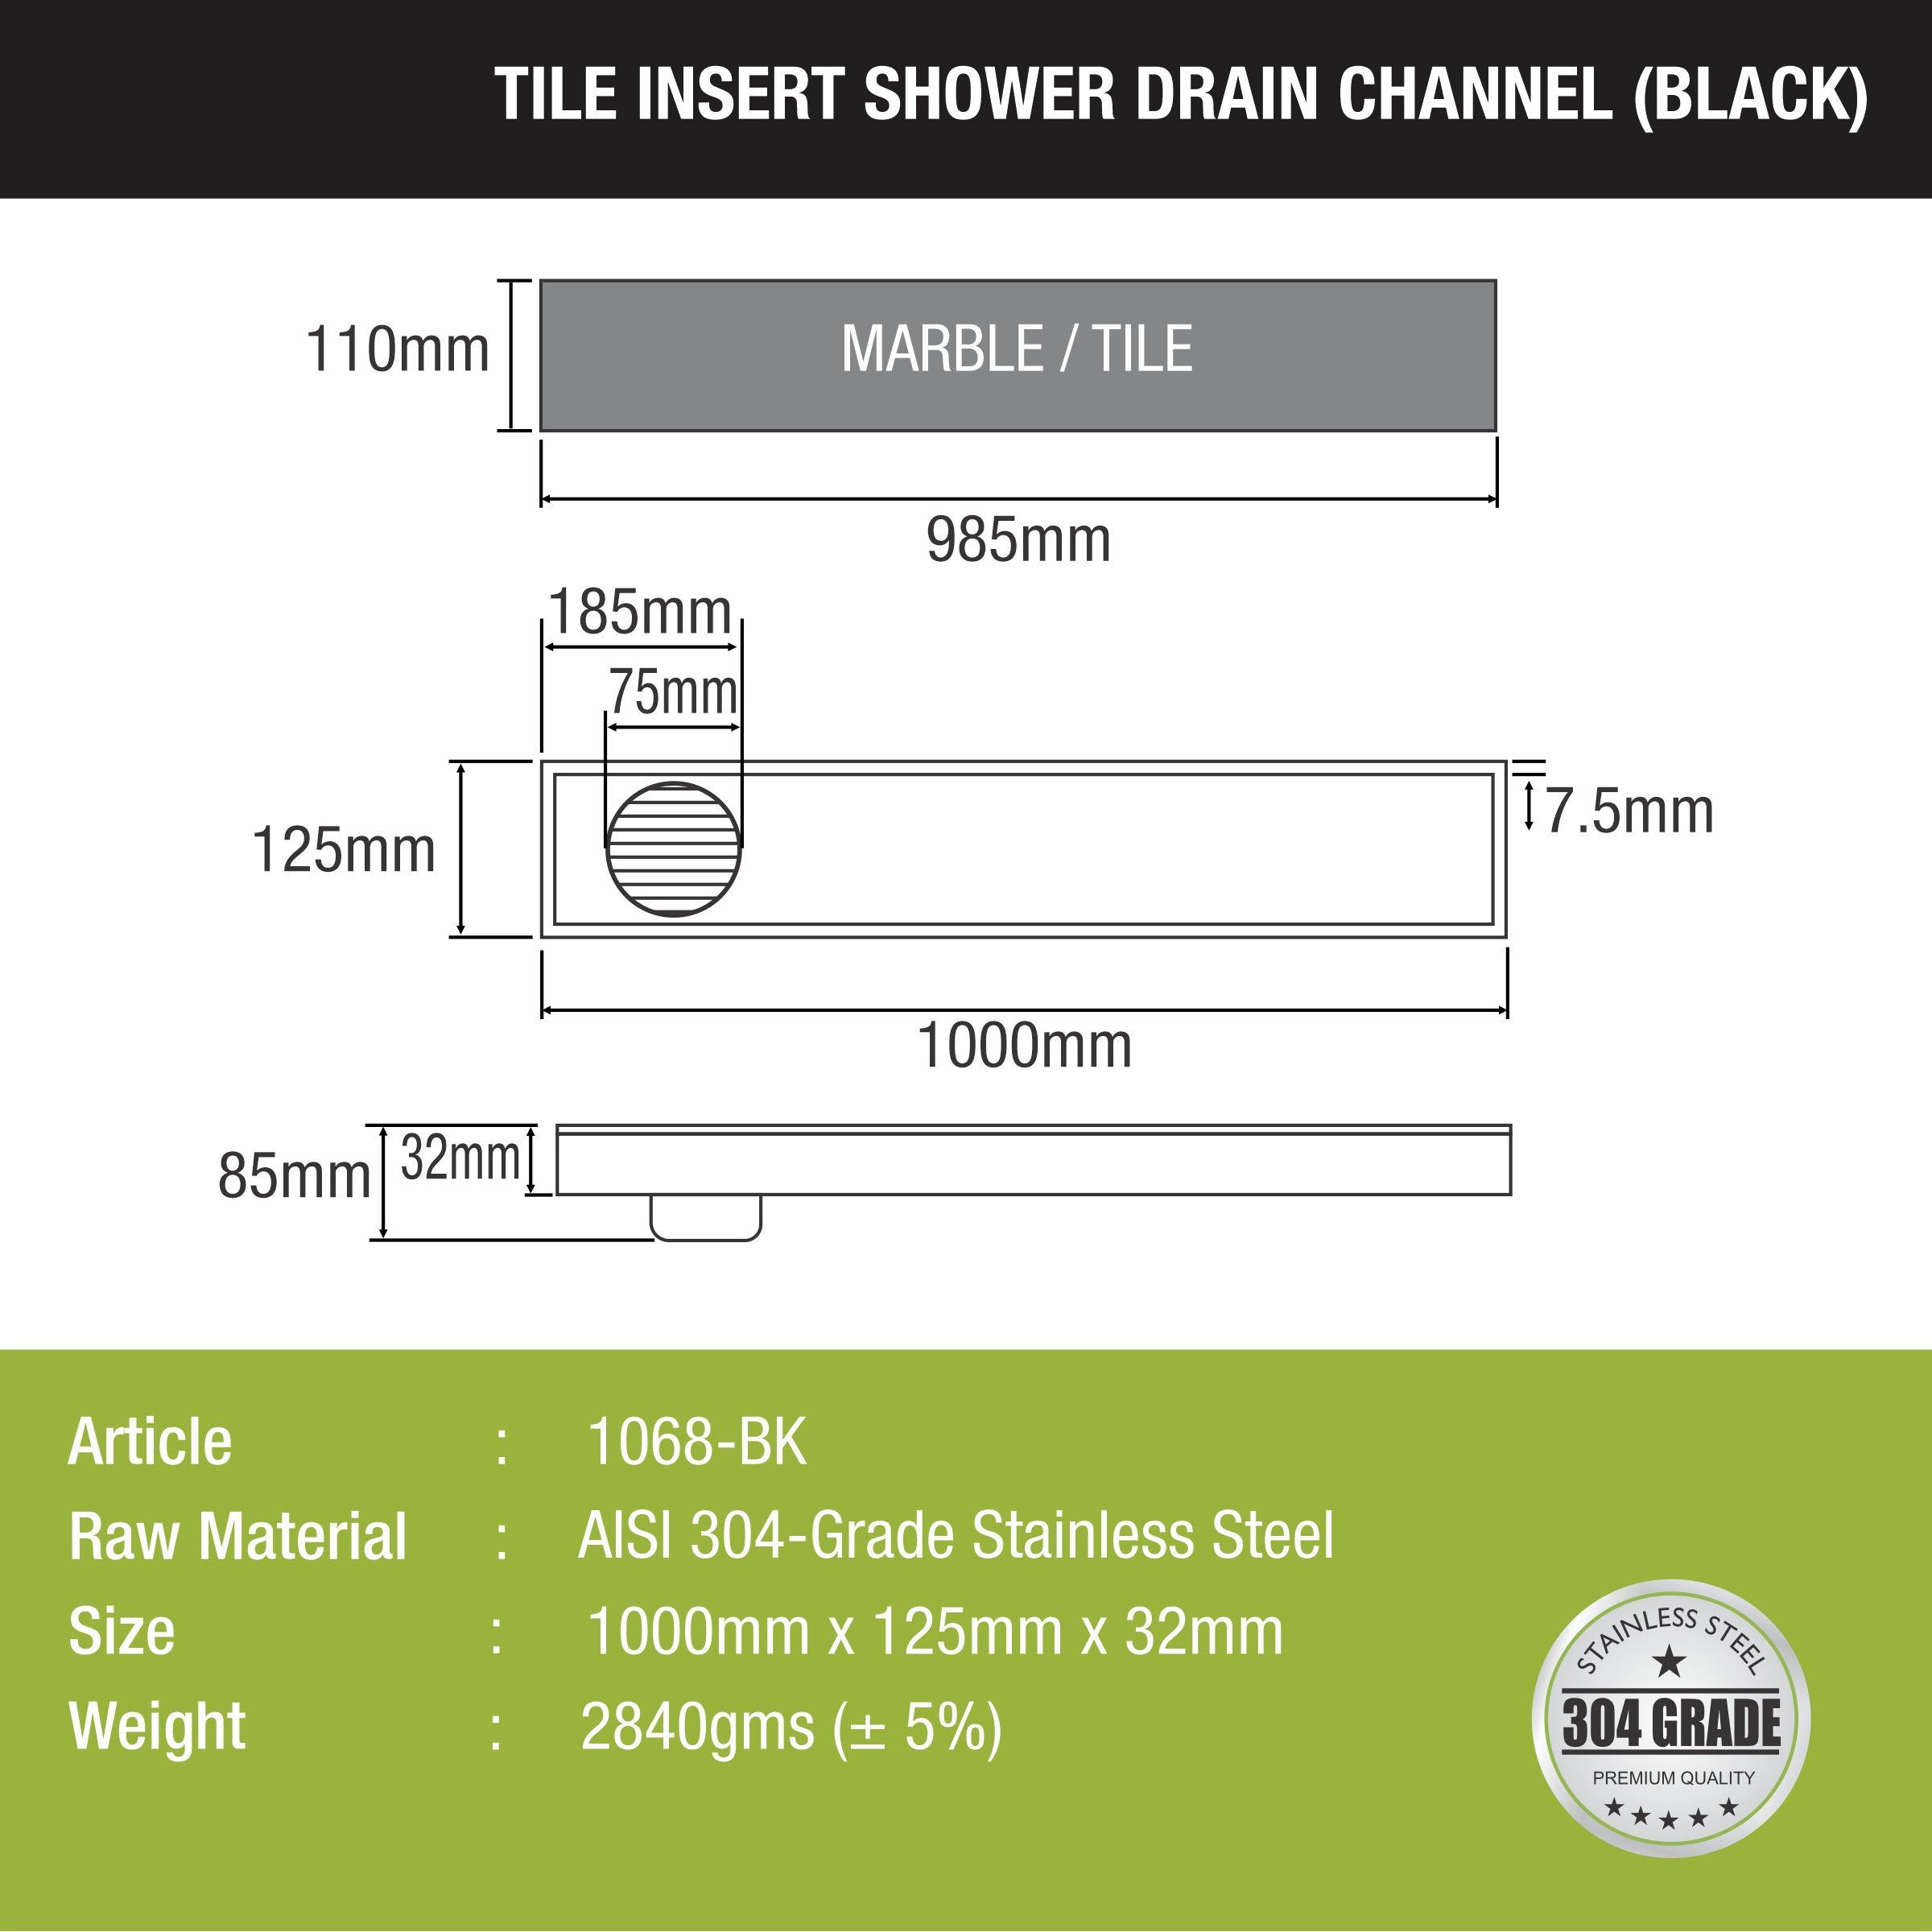 Tile Insert Shower Drain Channel - Black (40 x 5 Inches) size and measurement